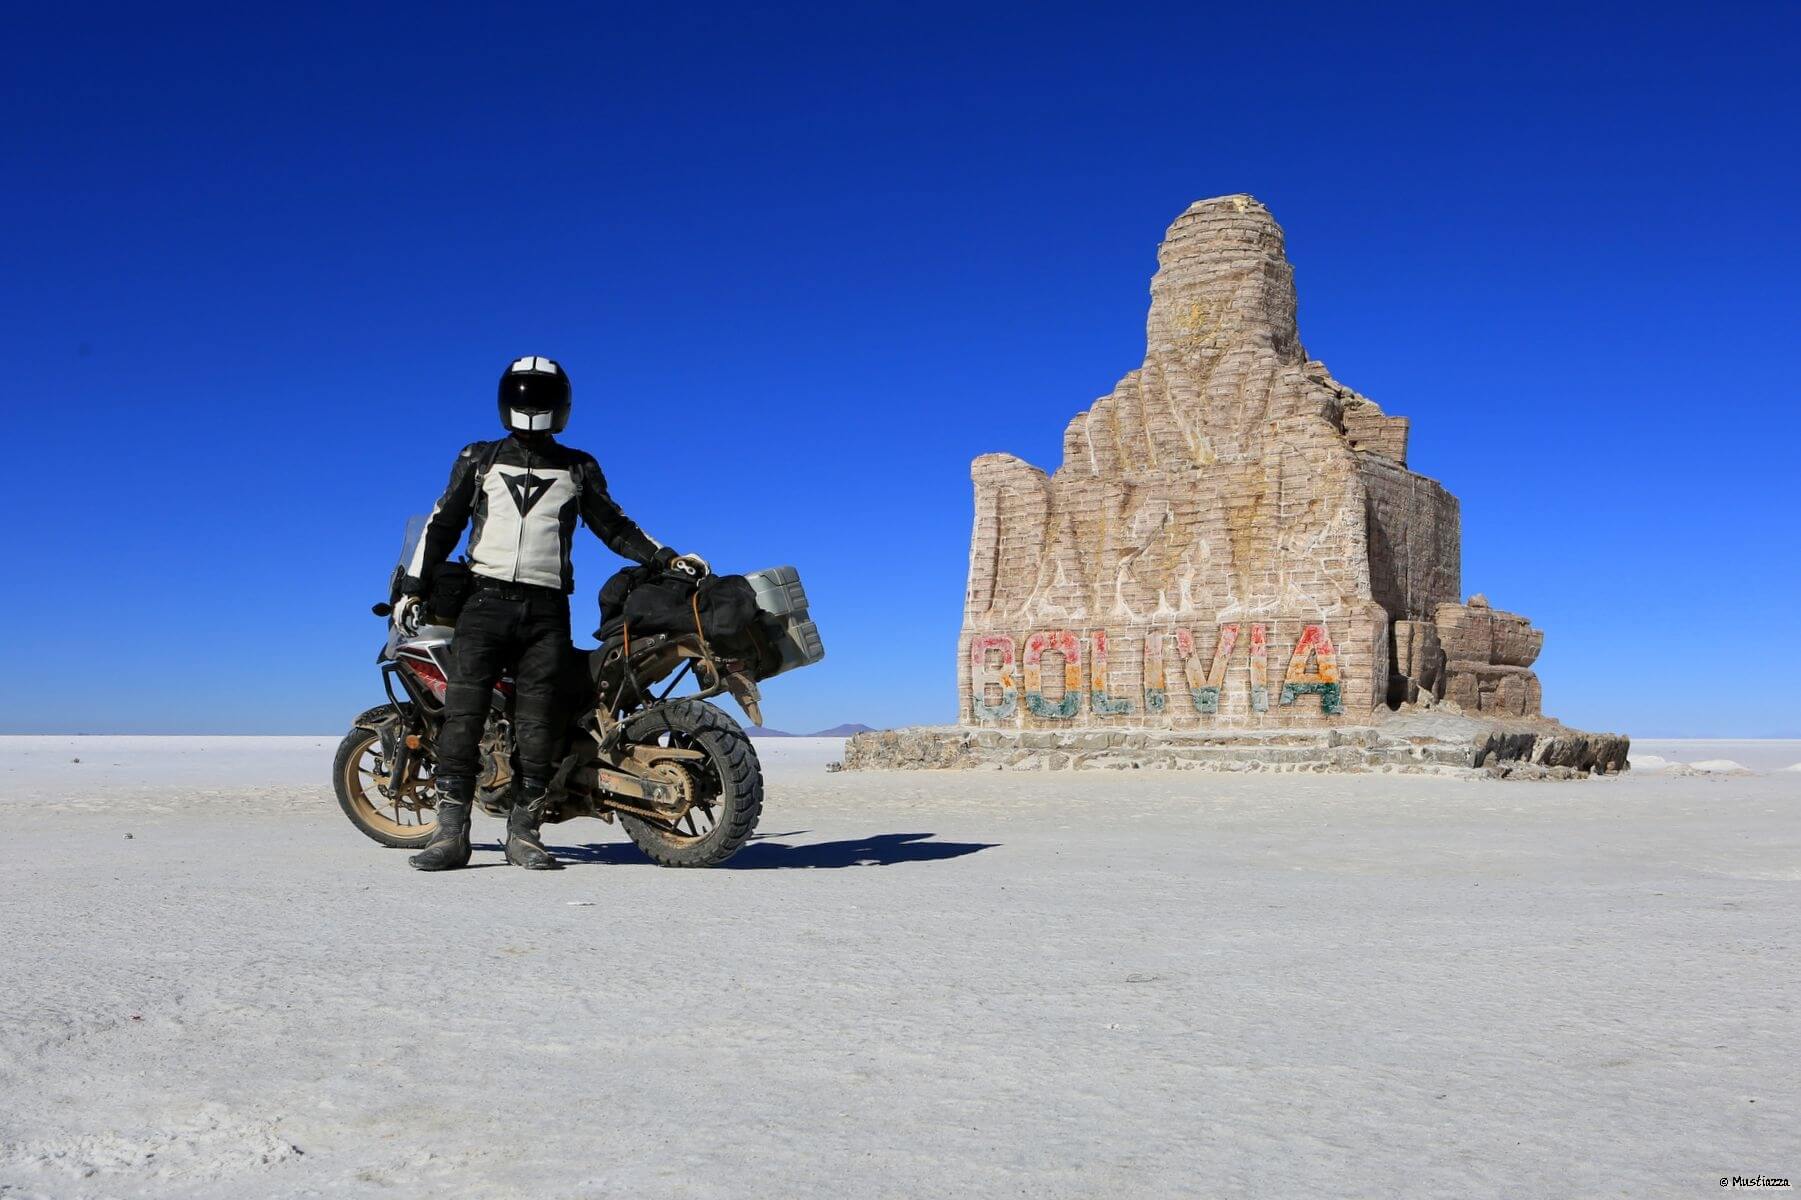 Oleg's Ride to the 3 Corners: Argentina, Bolivia & Chile